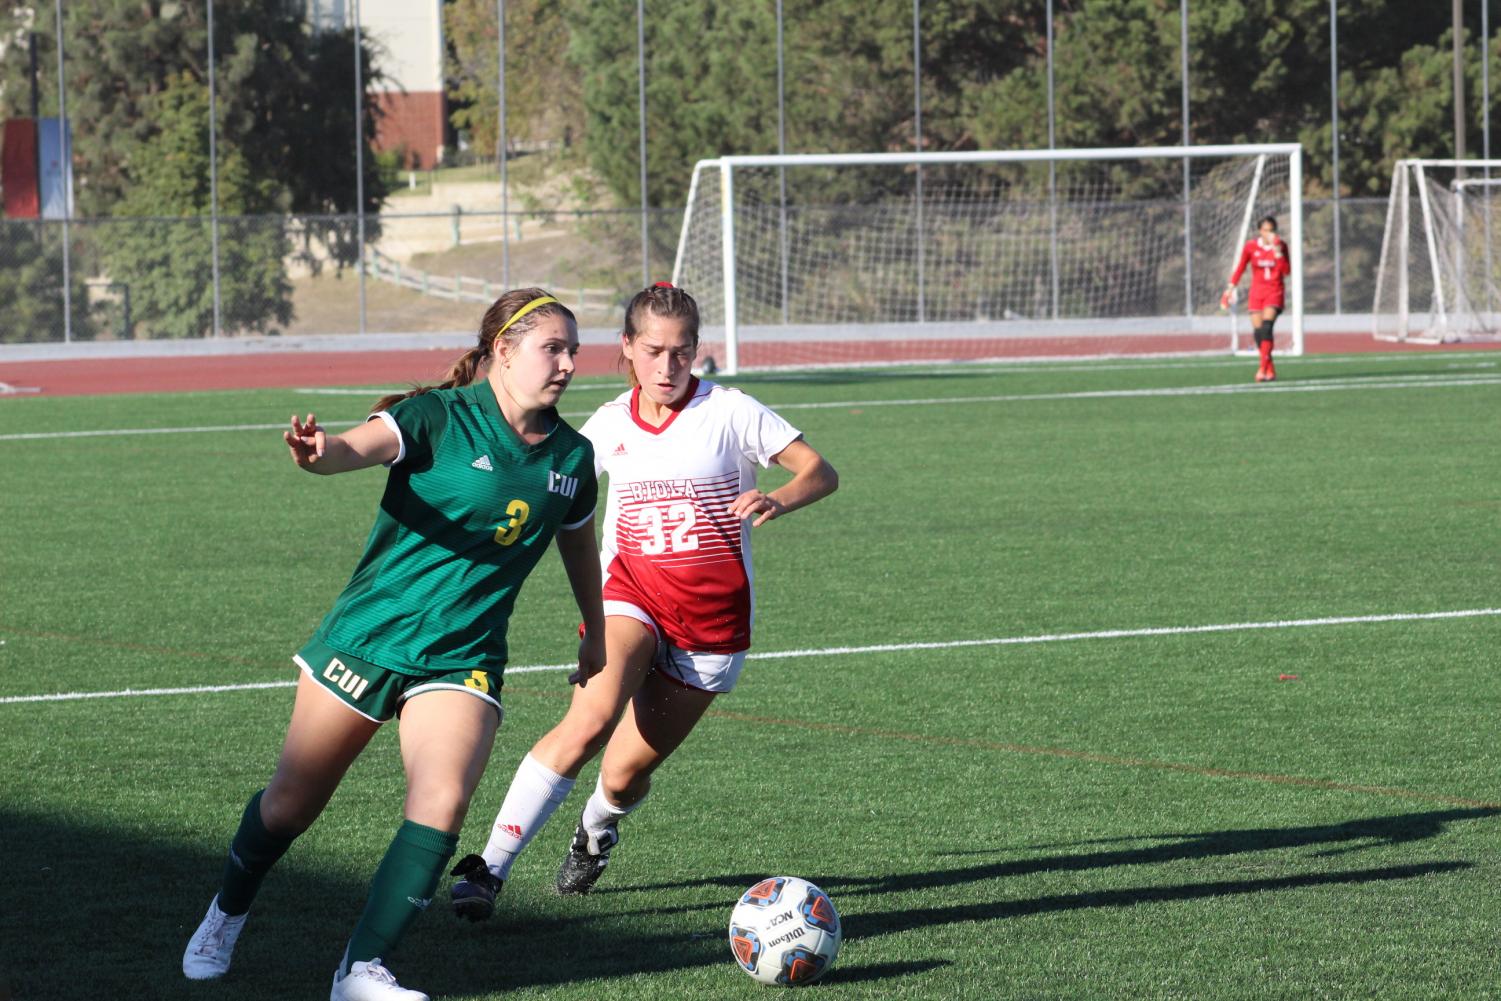 Freshman defender Madi Reeves moves in, in attempt to take the ball from her opponent.  During the October 2, 2019 match against Concordia University Irvine.  